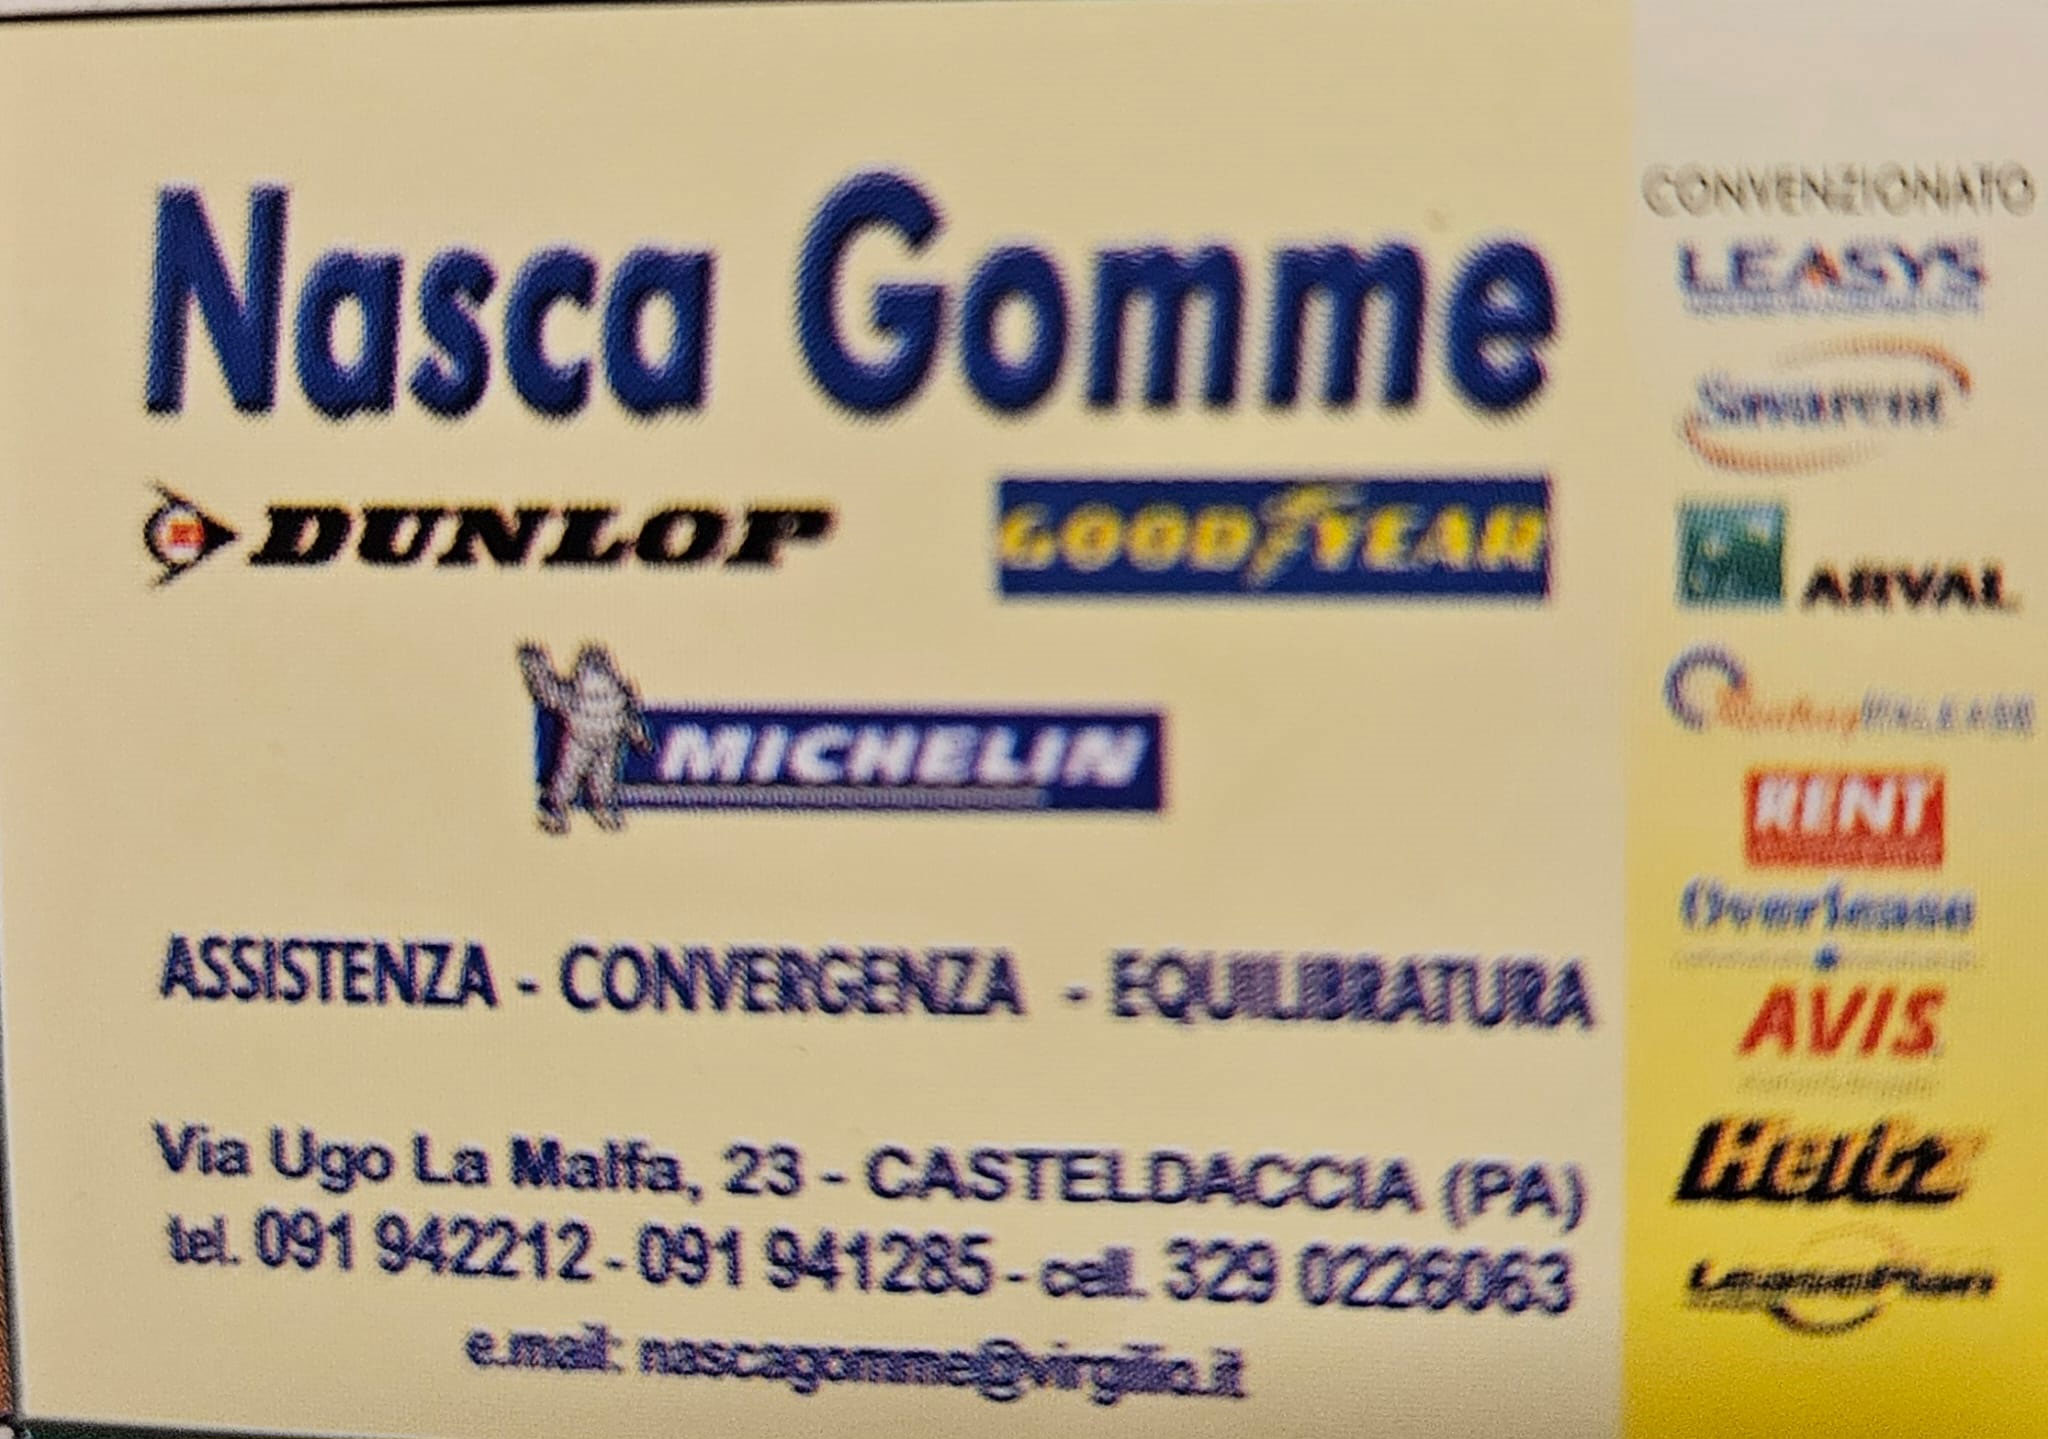 Nasca Gomme